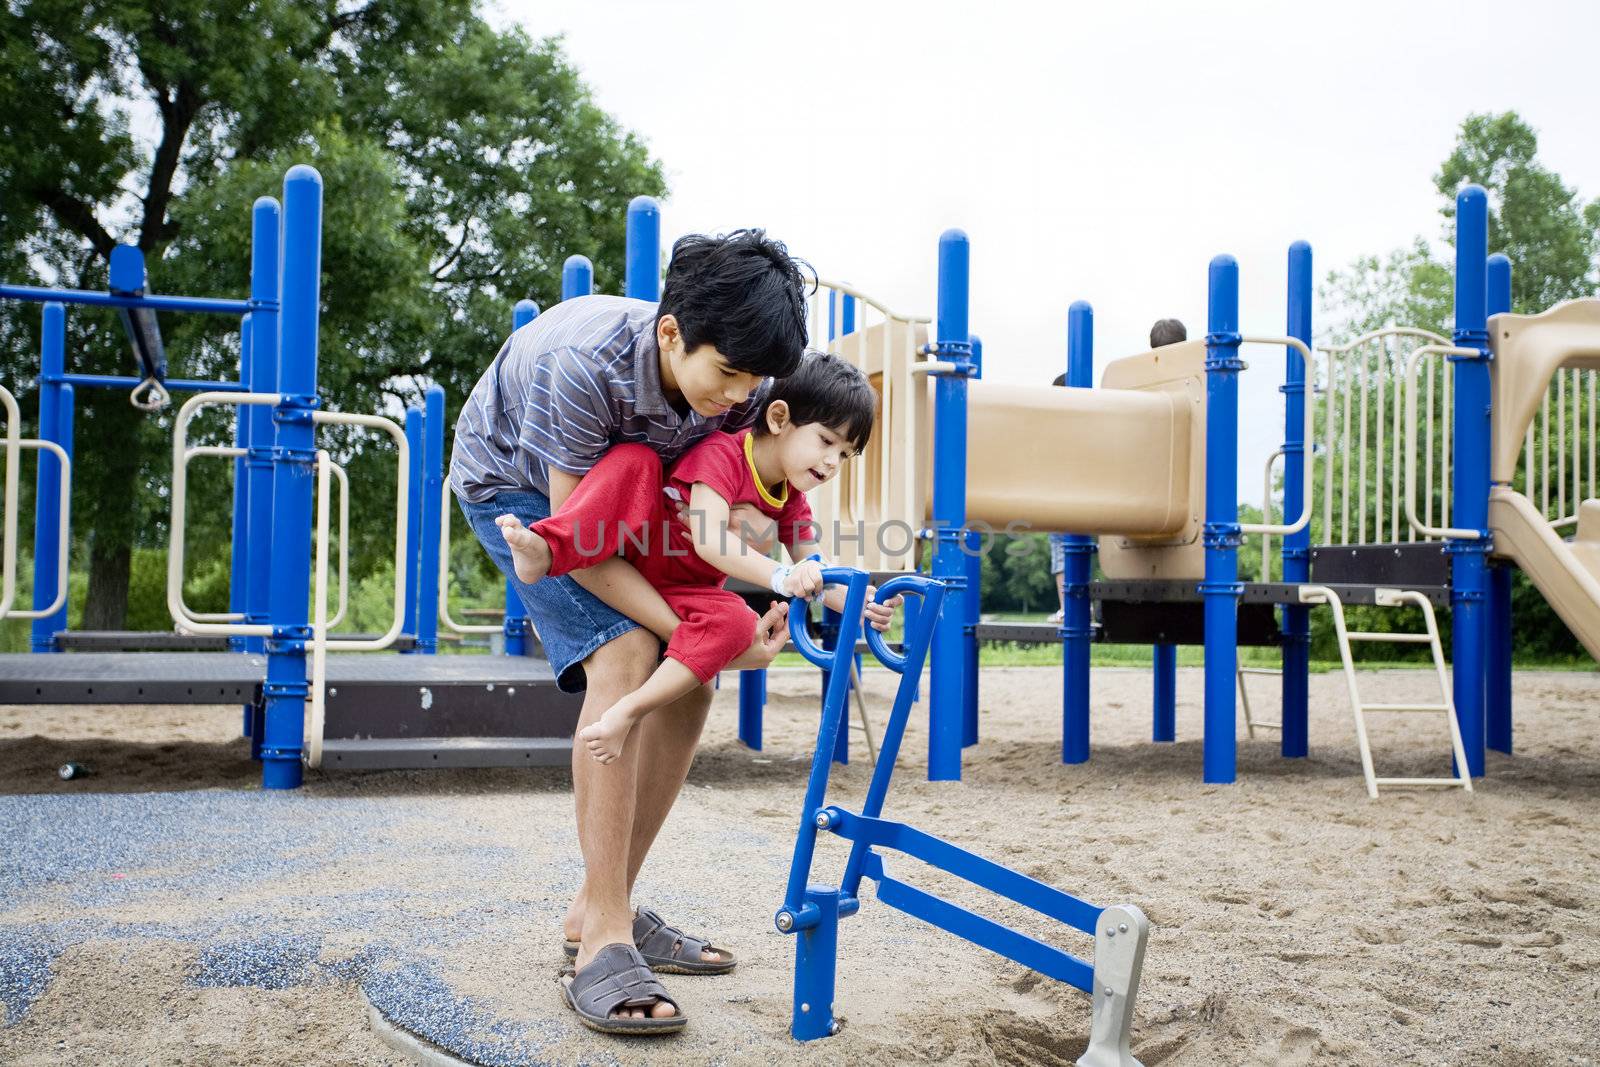 Older brother helping disabled sibling play at playground